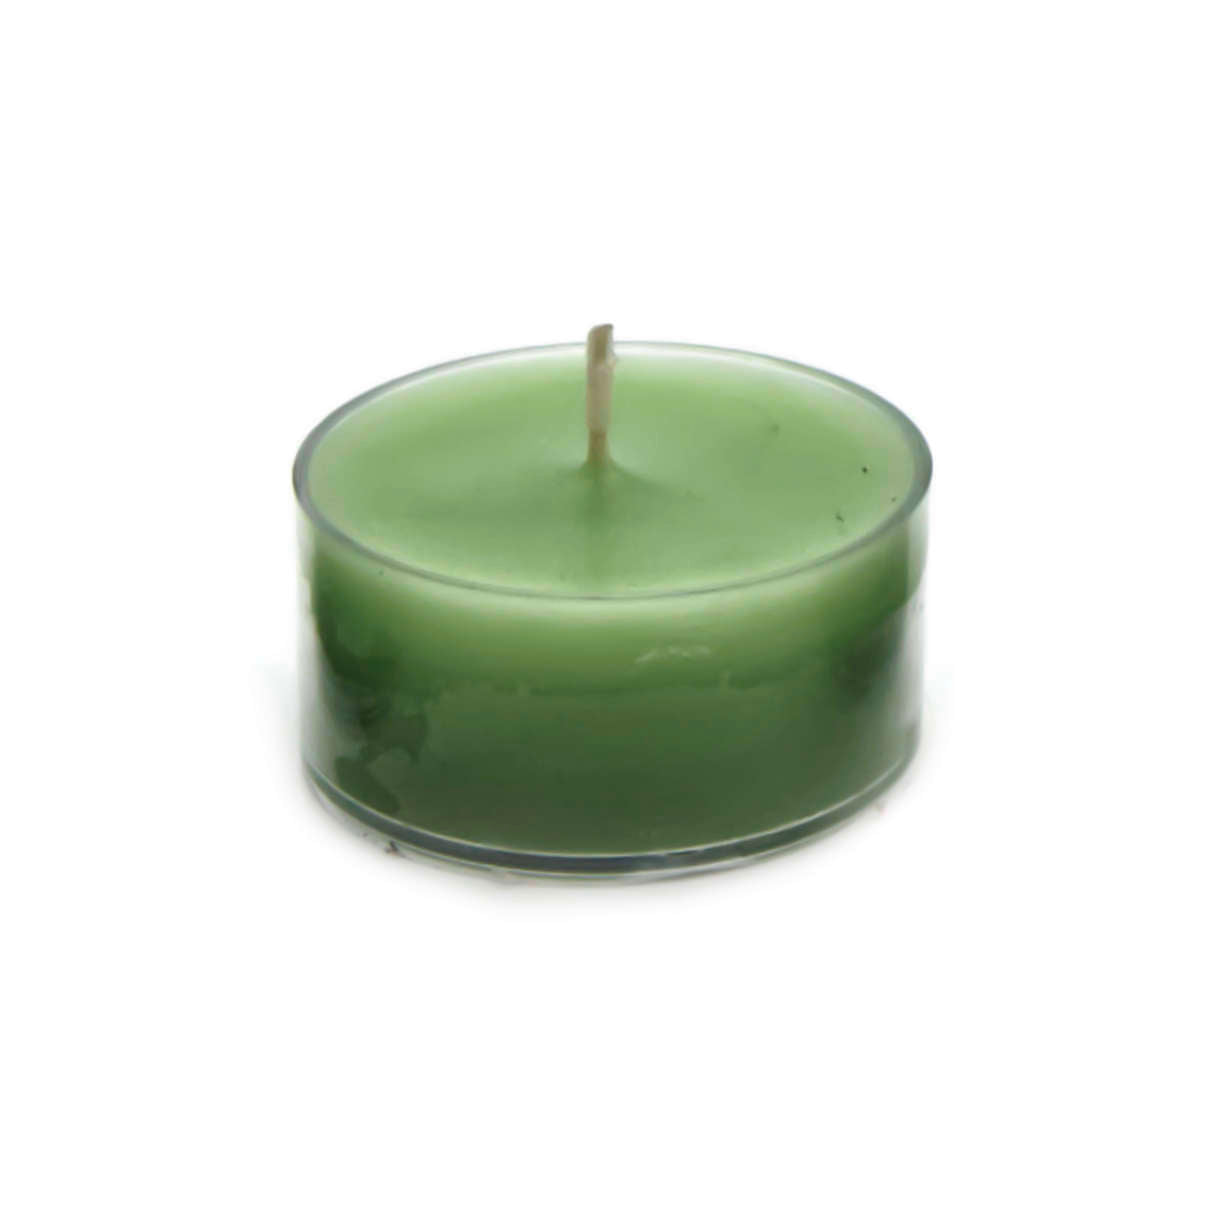 Fall Leaves Tealights scented candle